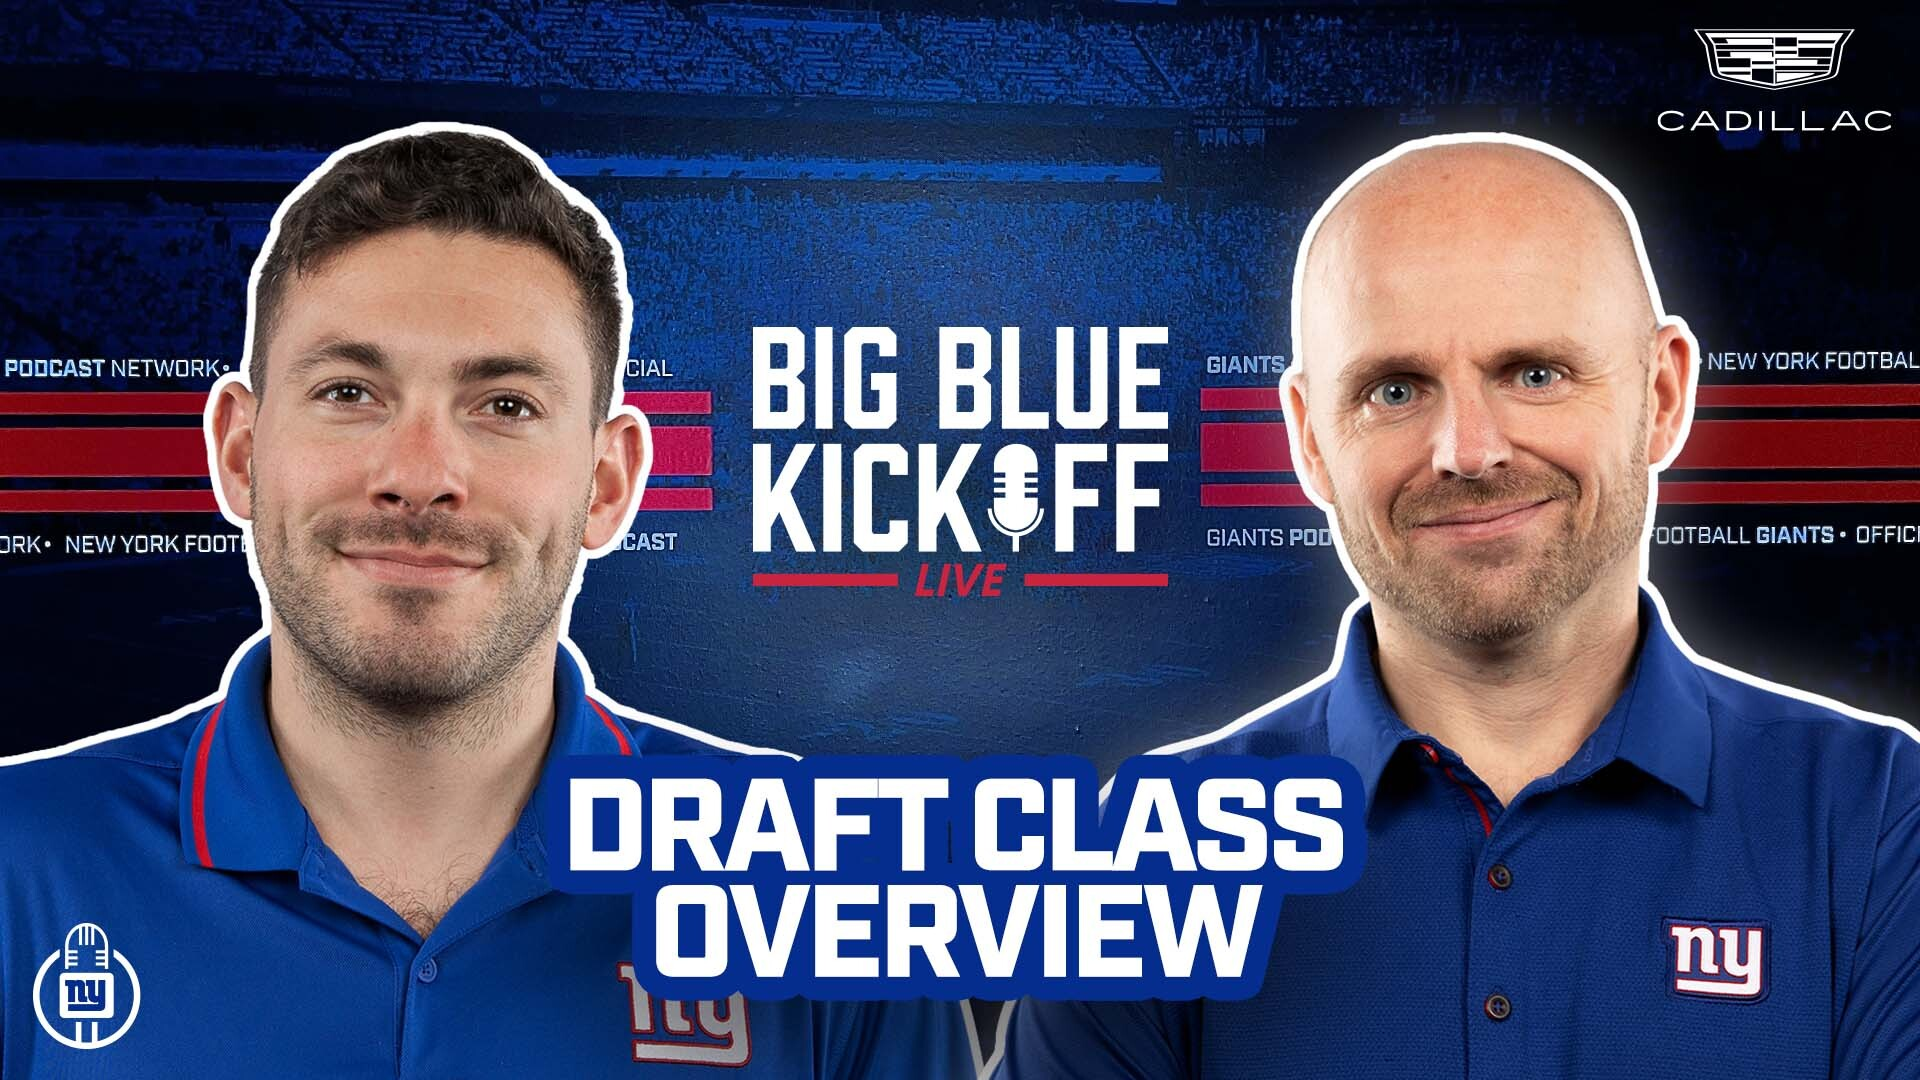 Big Blue Kickoff Live 4/29 | Draft Class Overview